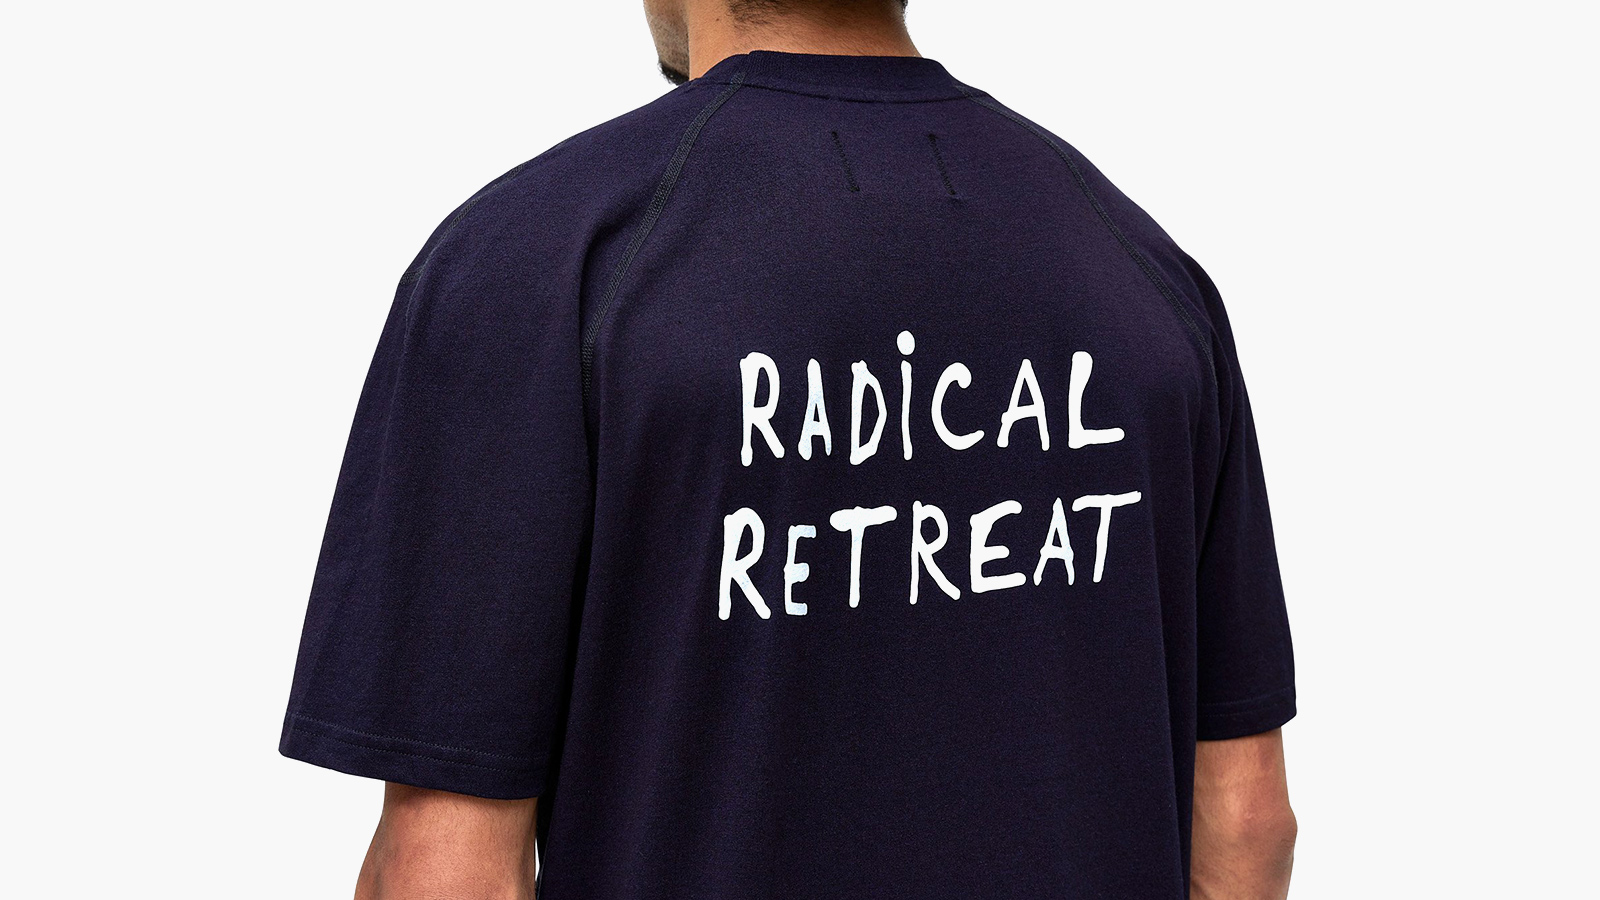 Reigning Champ x District Vision Radical Retreat Collection